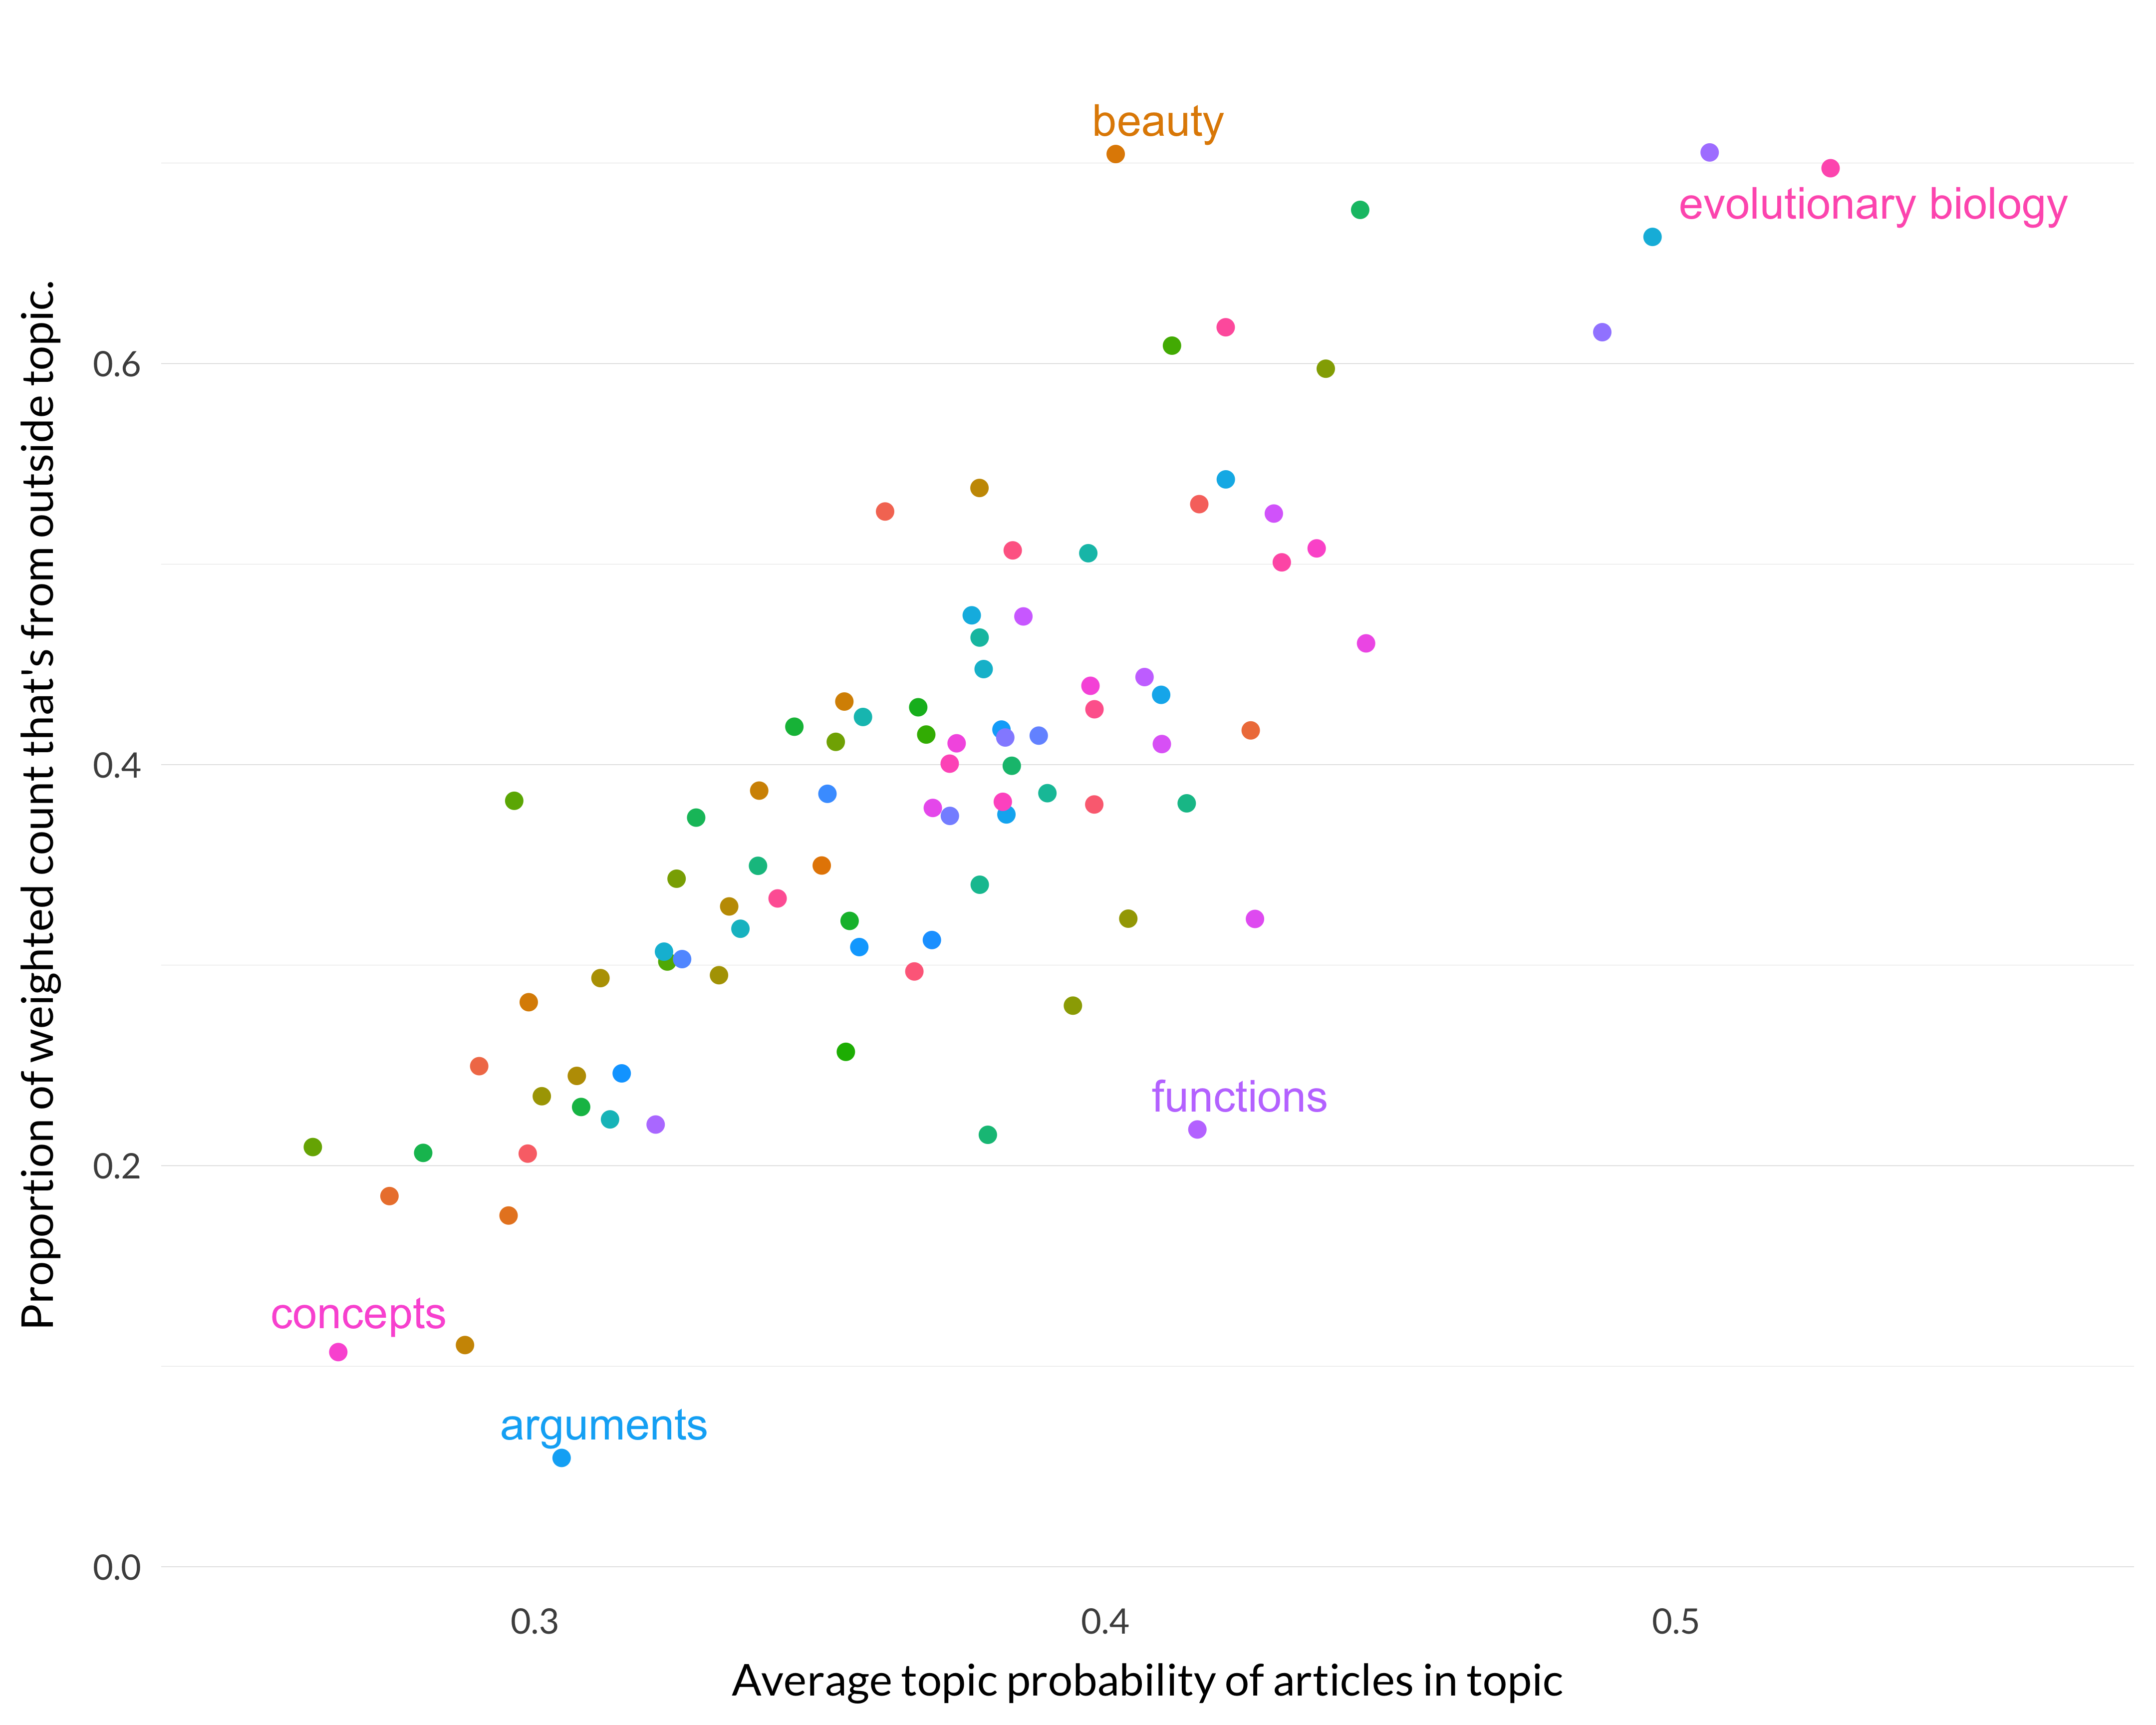 A scatterplot comparing the averate topic probability of articles in topic (p) to the proportion of weighted count that's from outside the topic (rp/w); i.e. comparing the second and third specialization measures. The two measures are well-correlated, with some outliers.